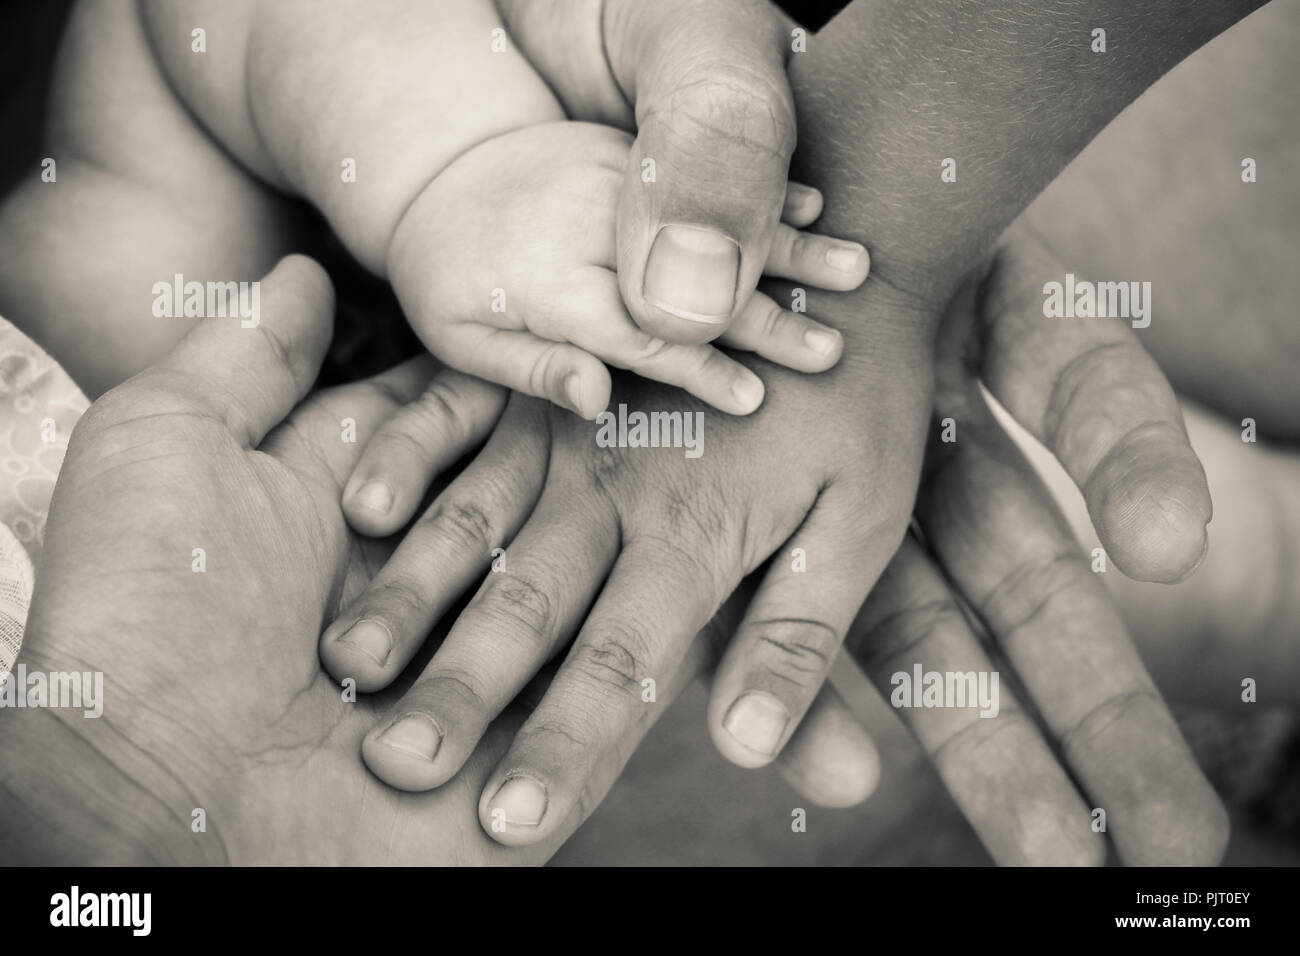 Four hands of family. Concept of love, friendship, happiness in family. Black and white shot. Stock Photo